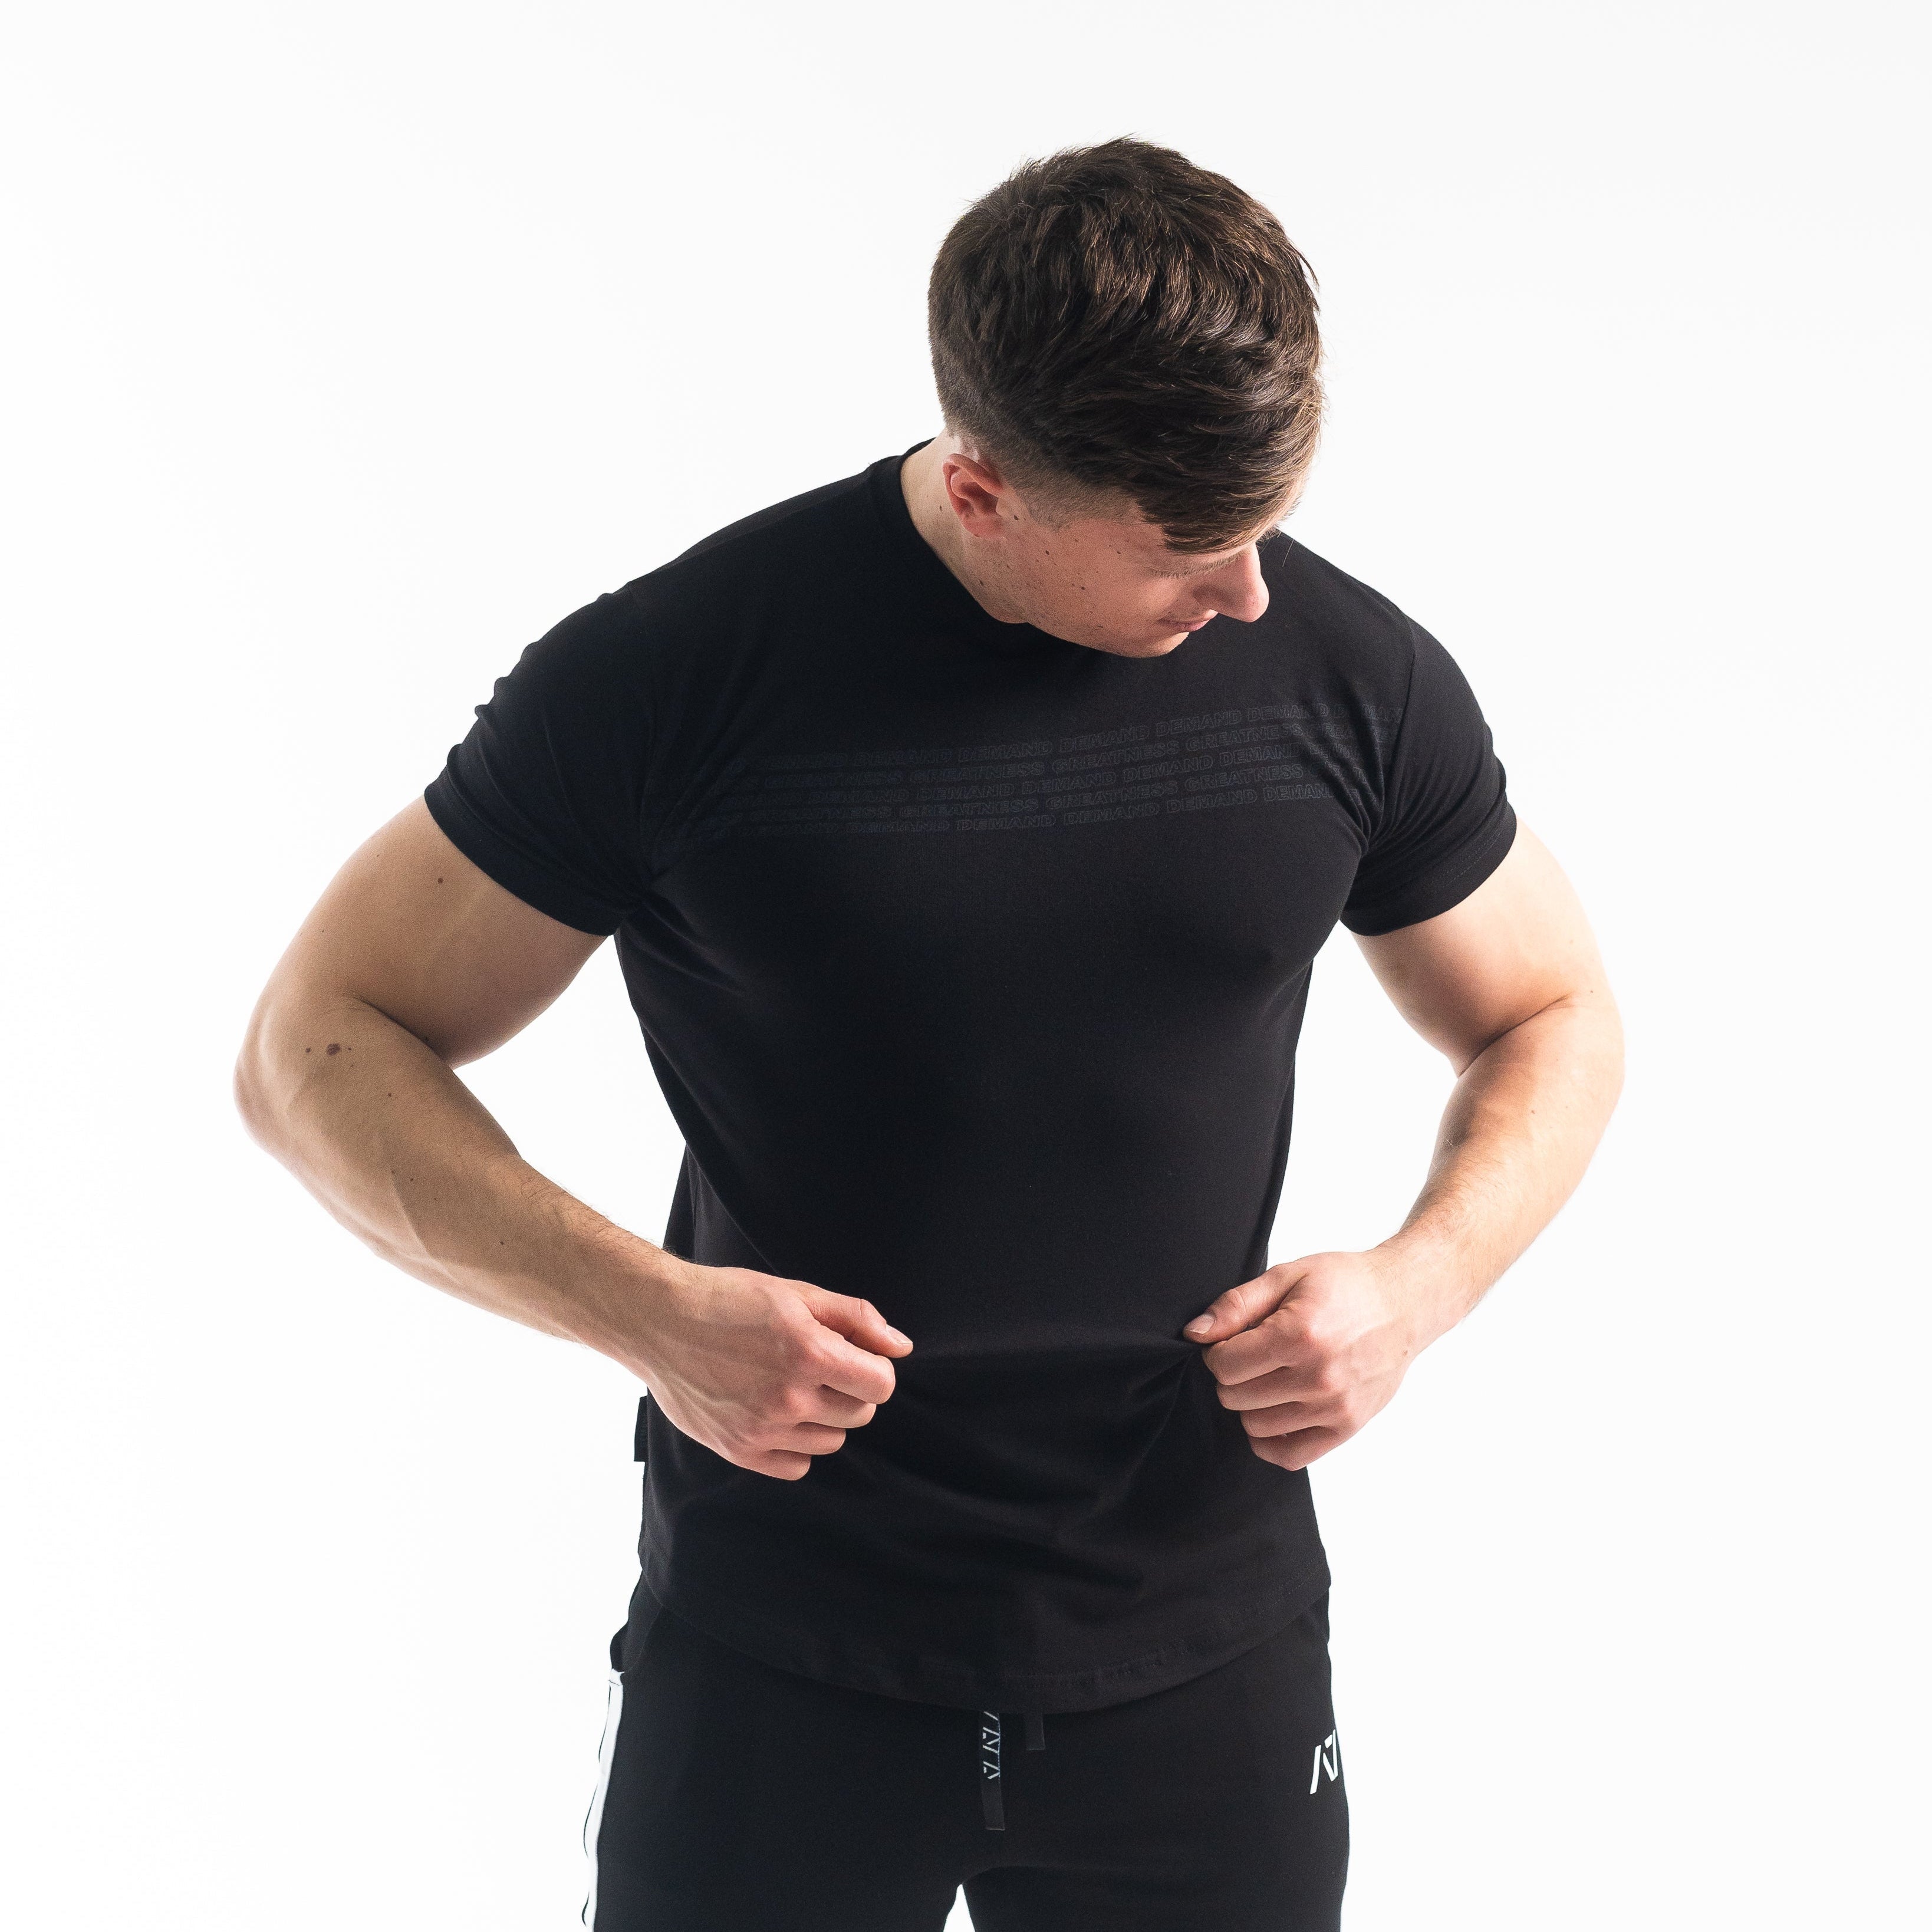 Purchase Stealth Wave Non Bar Grip Shirt from A7 Europe, shipping to France, Spain, Ireland, Germany, Italy, Sweden and EU.